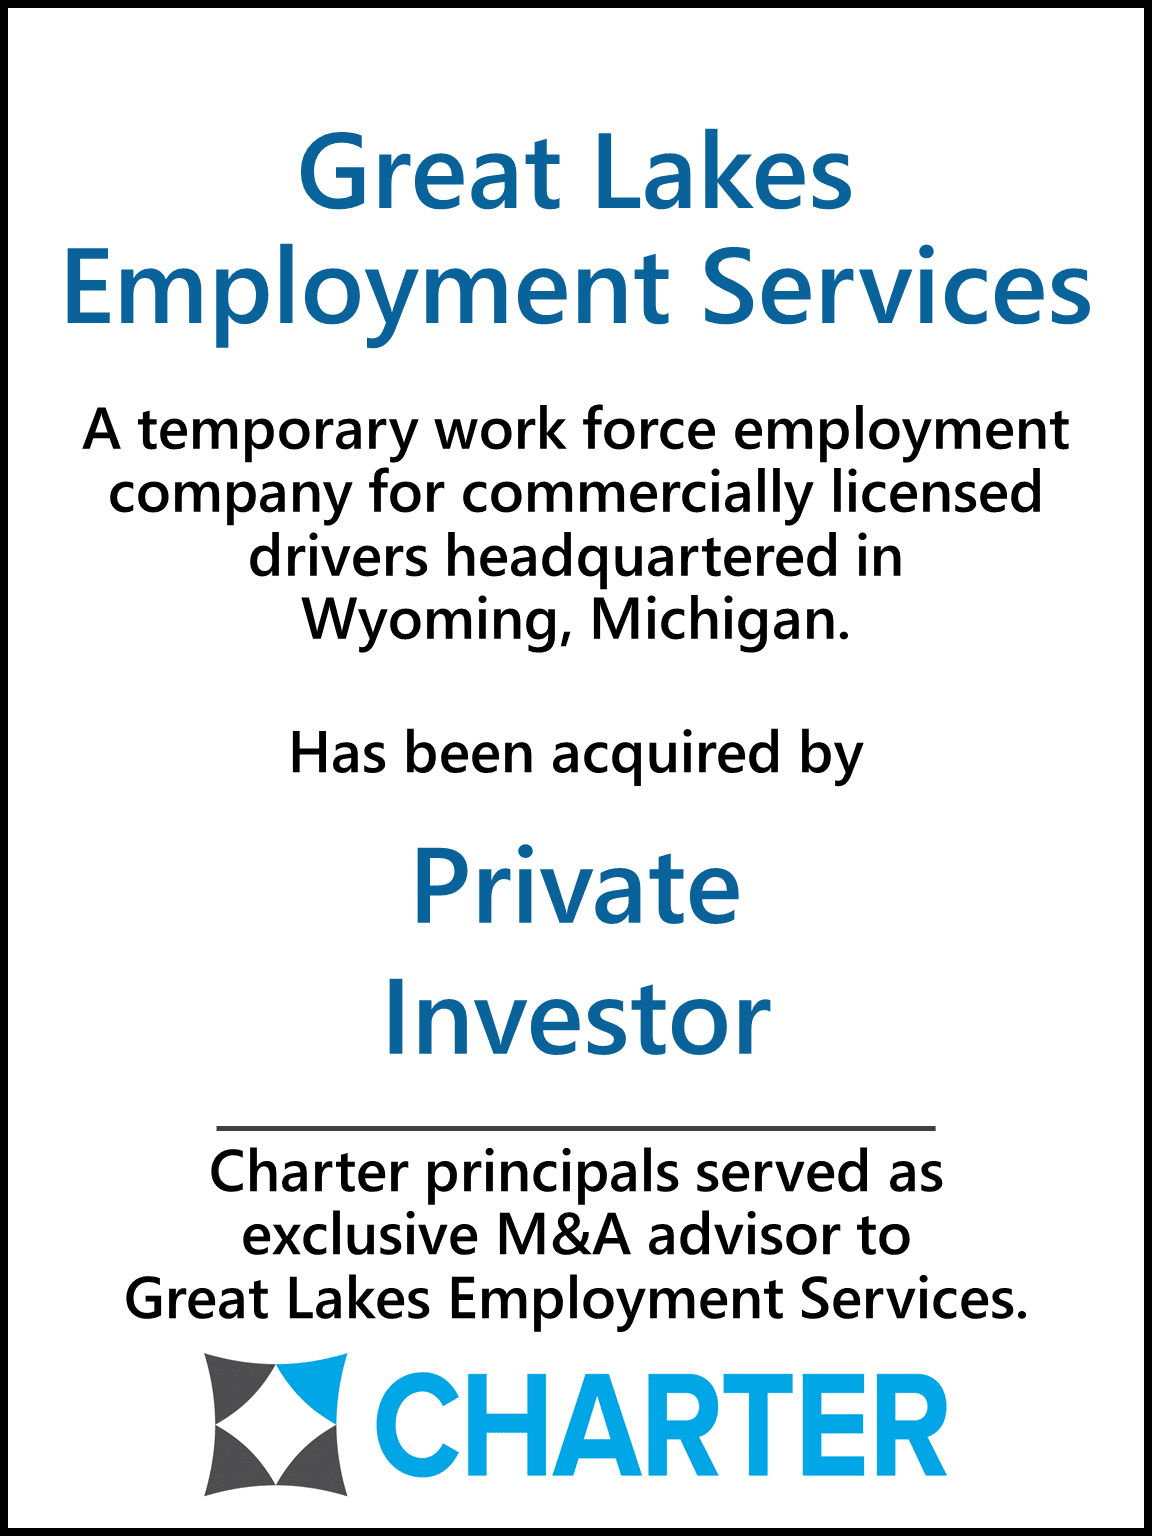 Great Lakes Employment Services